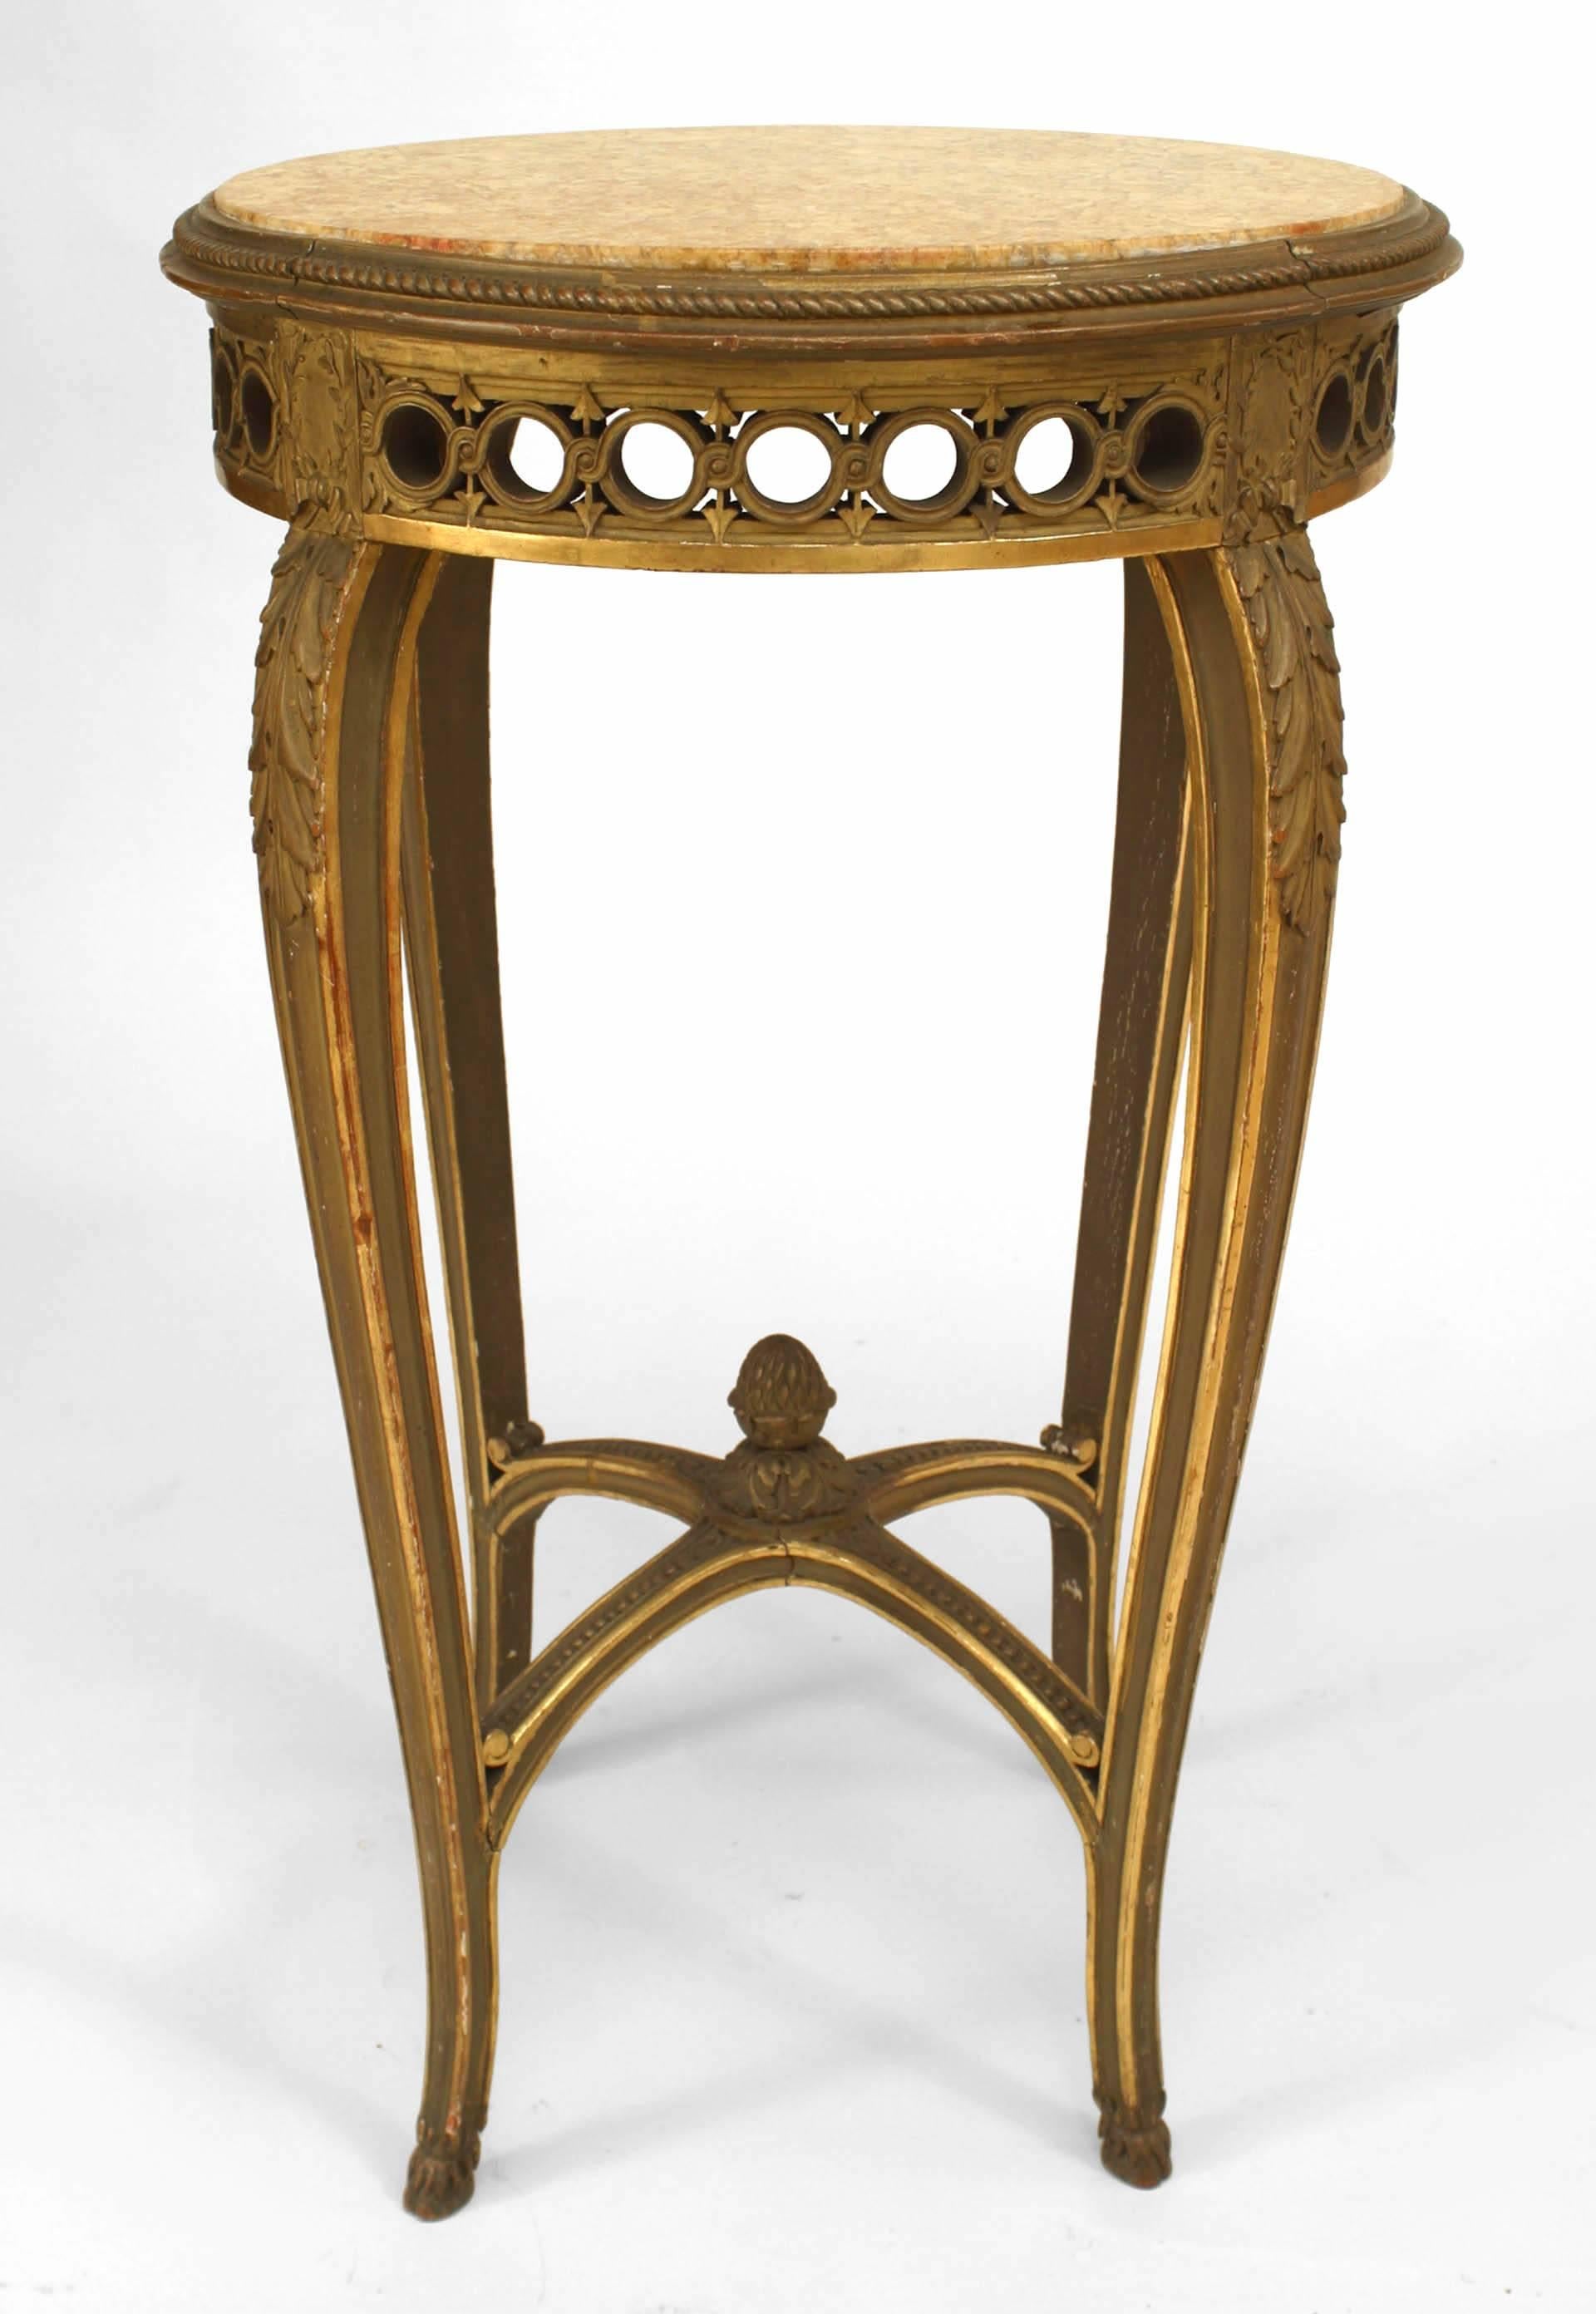 French Regence style ‘19th century’ round giltwood end table with circle filigree apron, finial stretcher, and yellow marble-top.
   